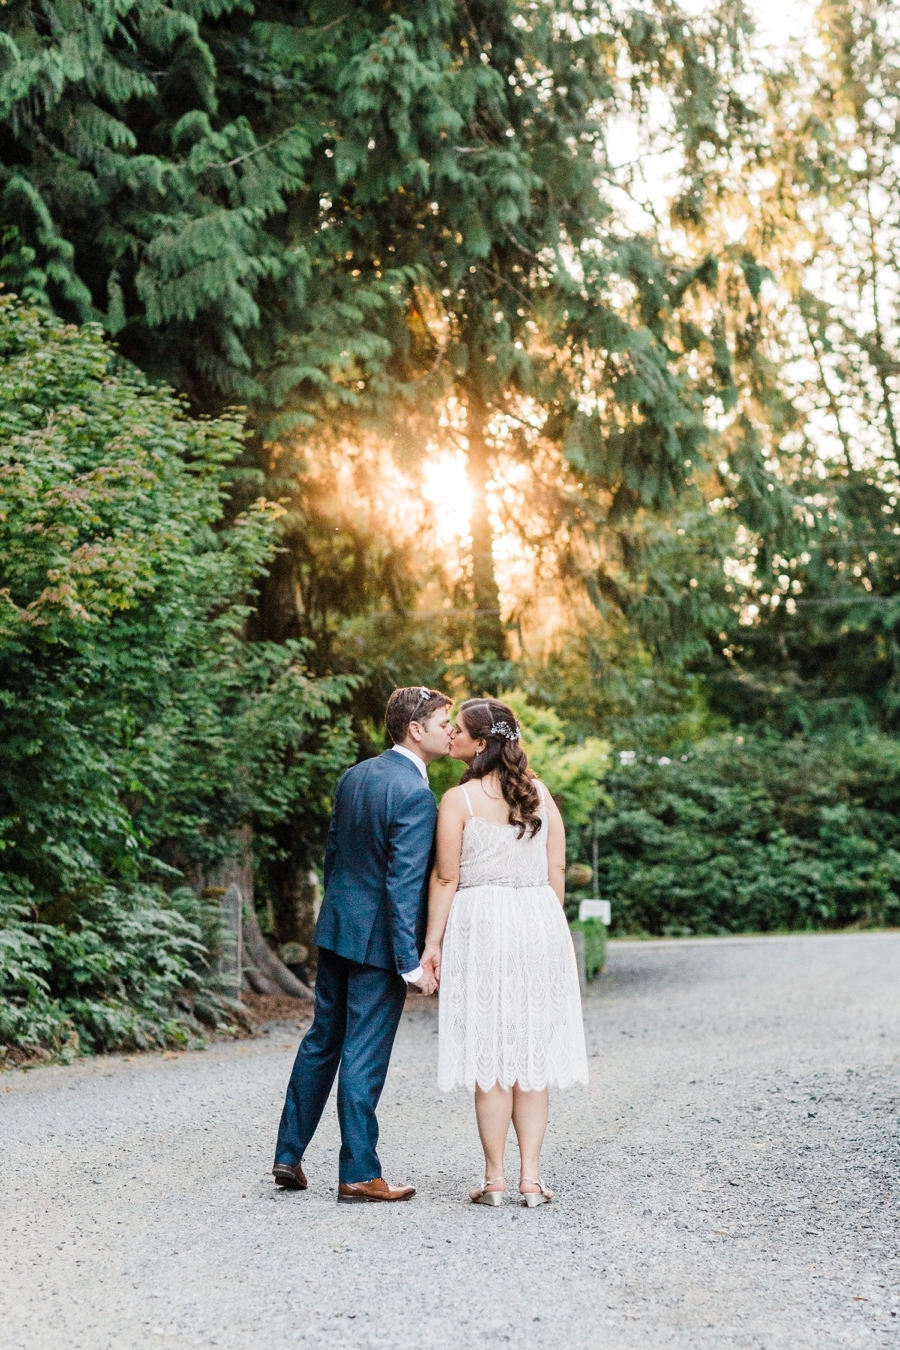 A bride and groom pose for photos on a hot summer day during their wedding at Green Gates at Flowing Lake by Seattle wedding photographer Amy Galbraith